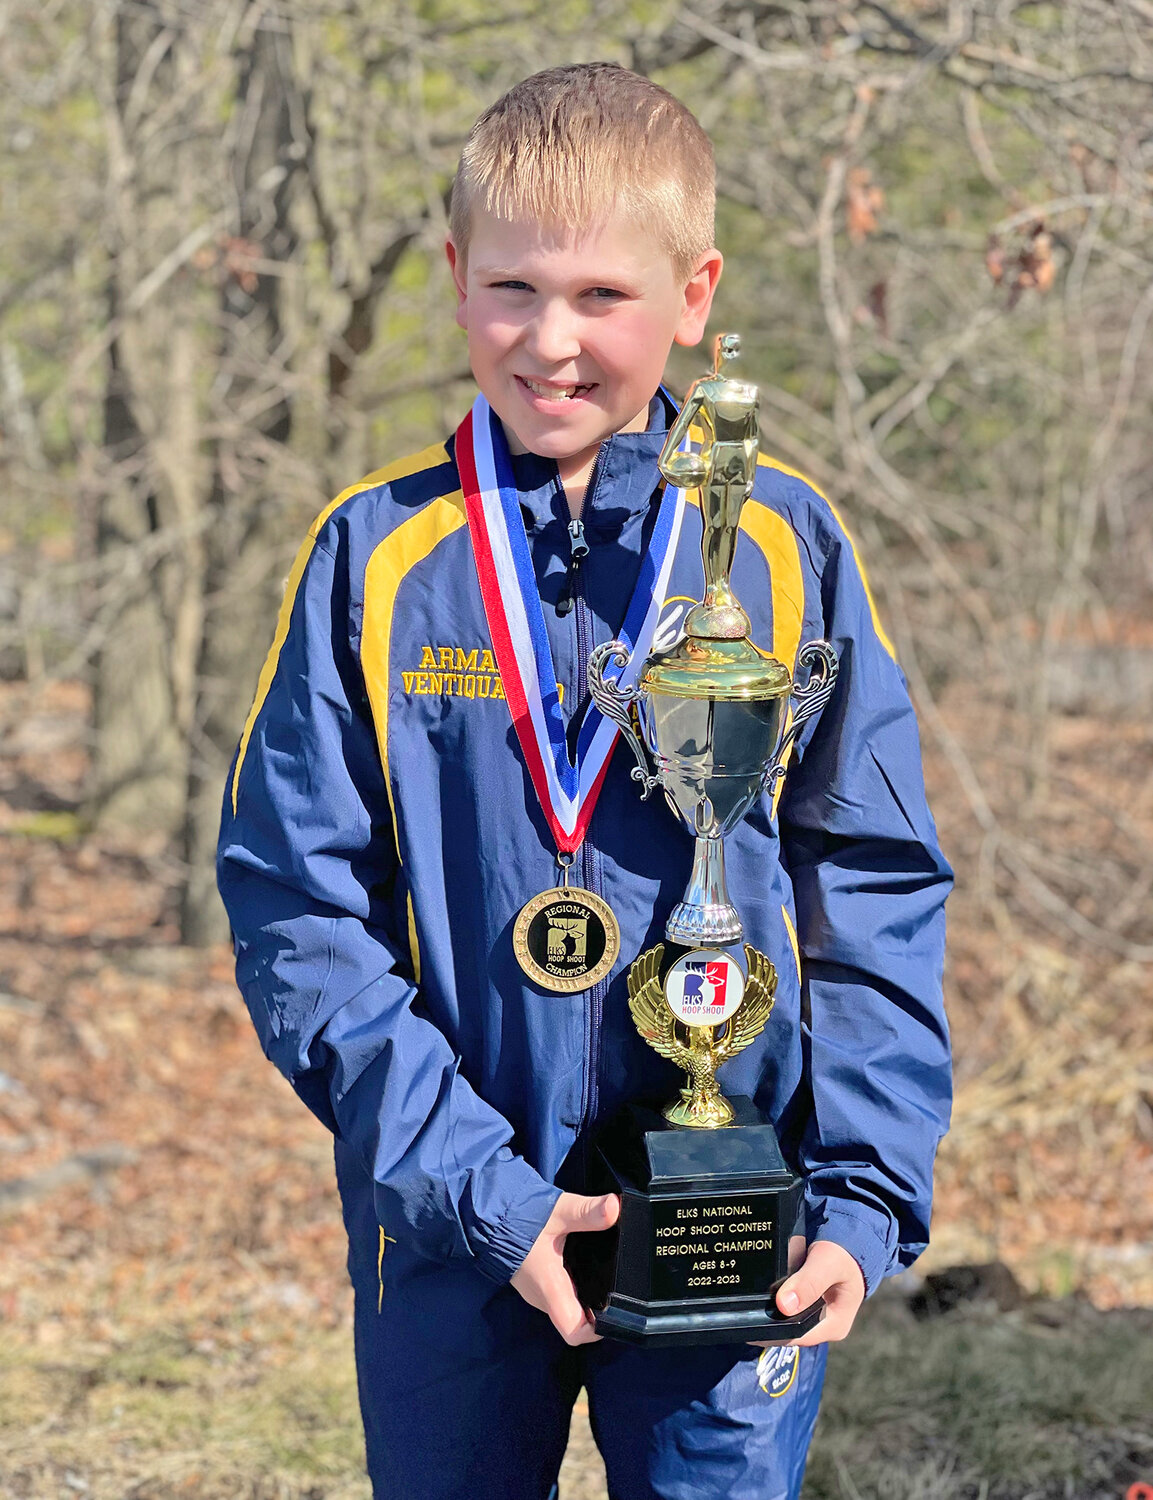 Armante “Bo” Ventiquattro is headed to the national finals for the Elks Hoop Shoot competition in the boys 8-9 age division after winning Region 5 in Pennsylvania last weekend. He represents the Boonville Lodge.